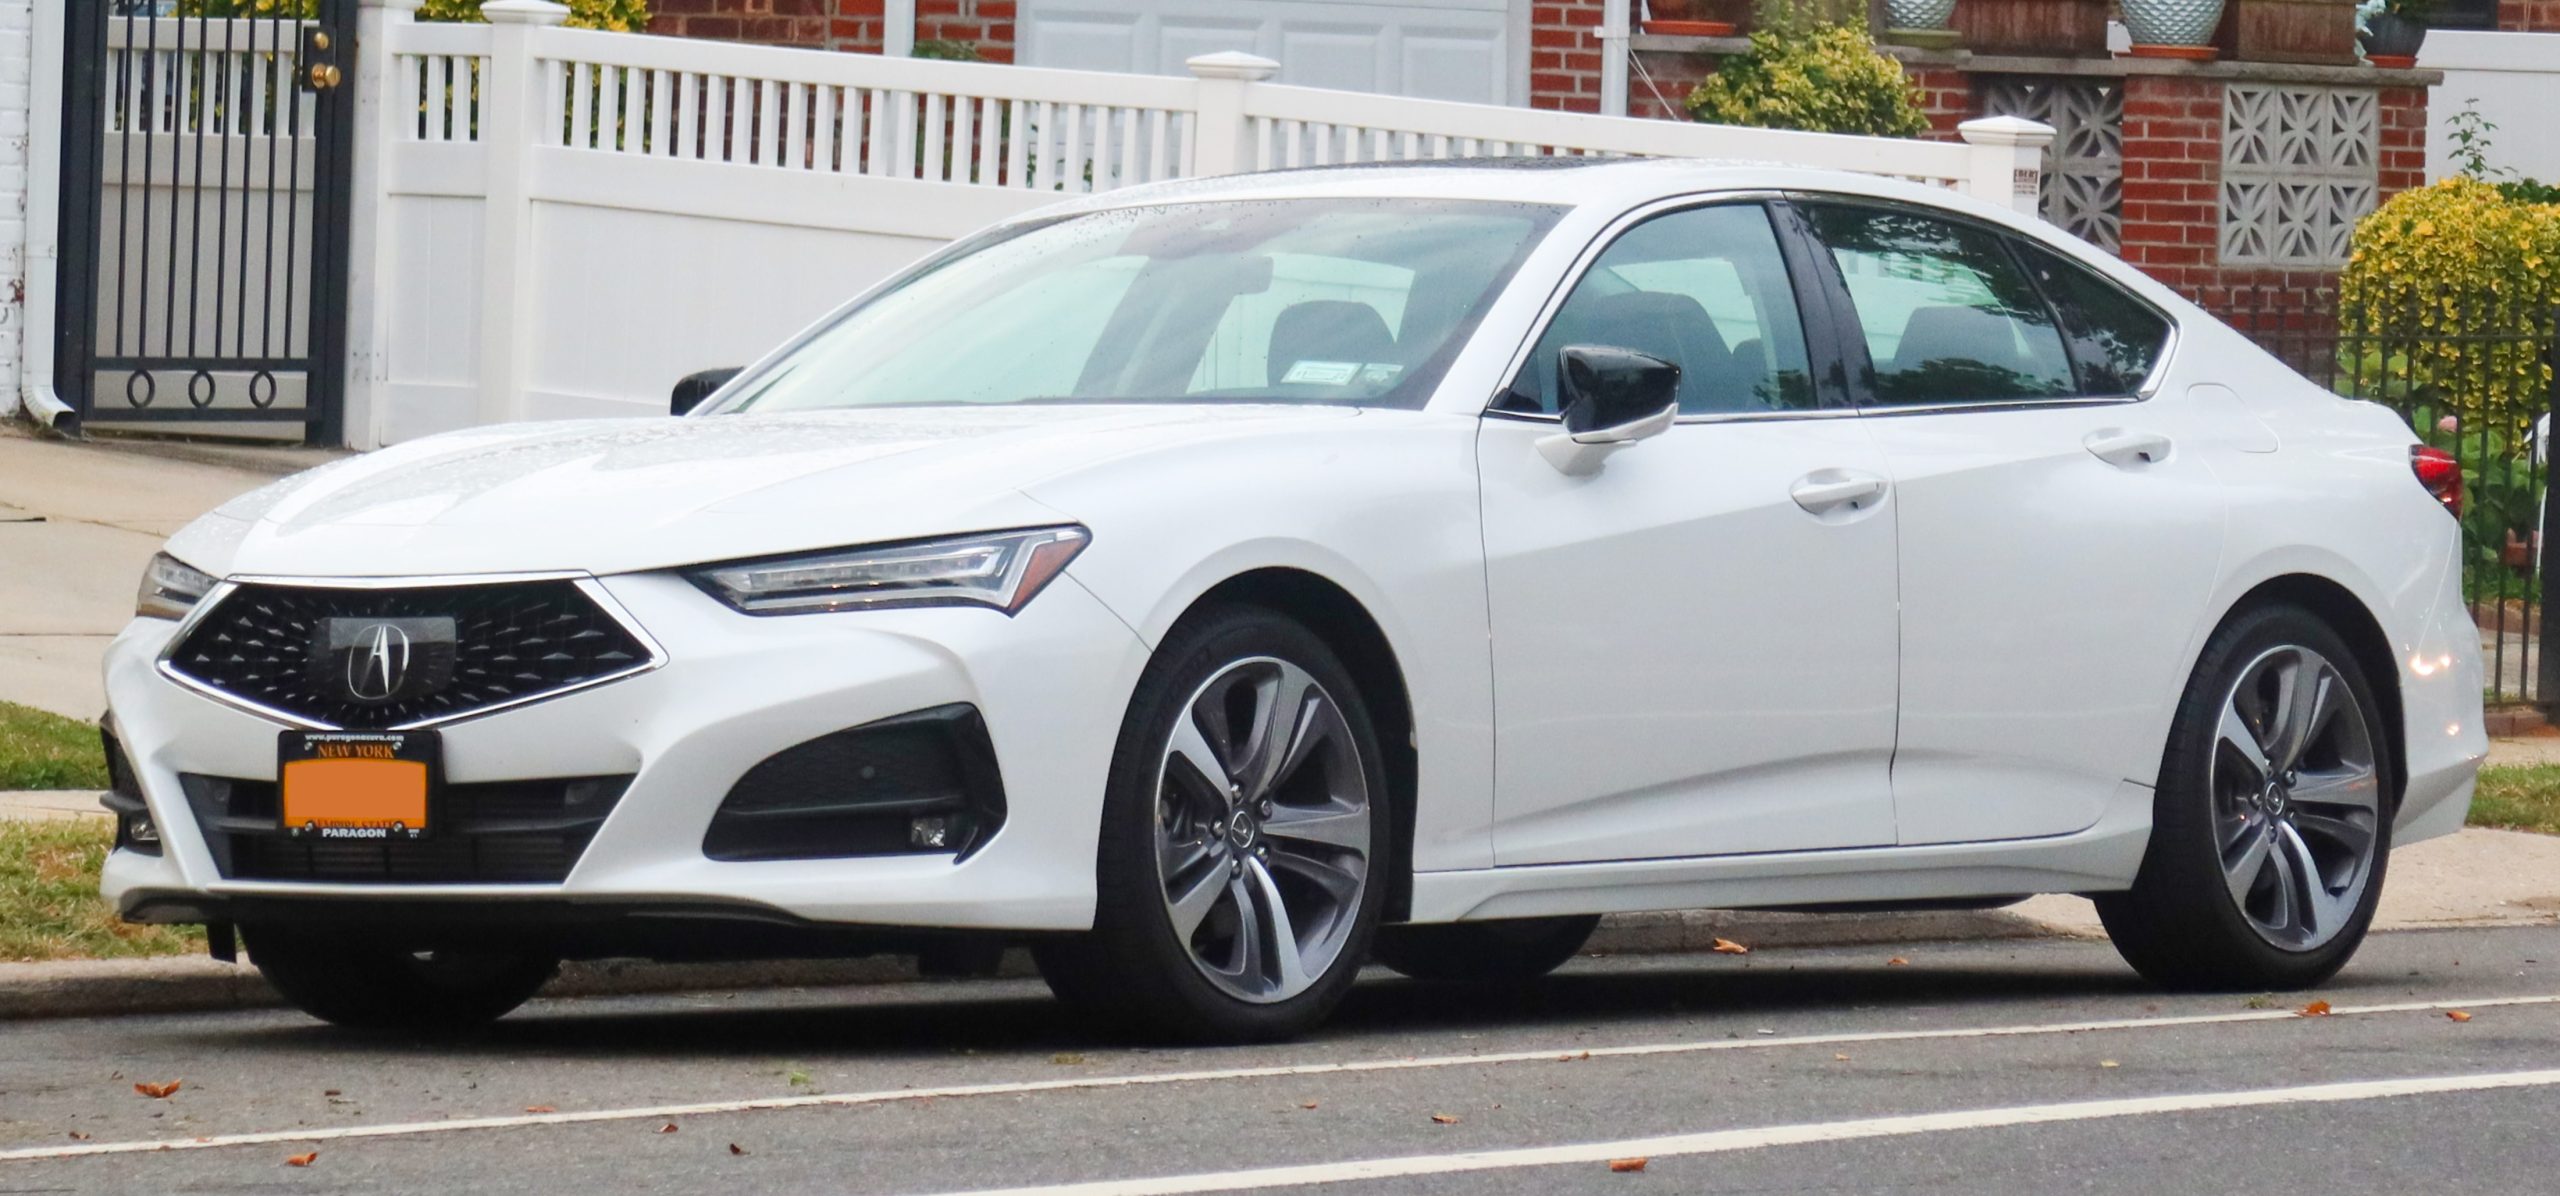 How to Ship An Acura TLX